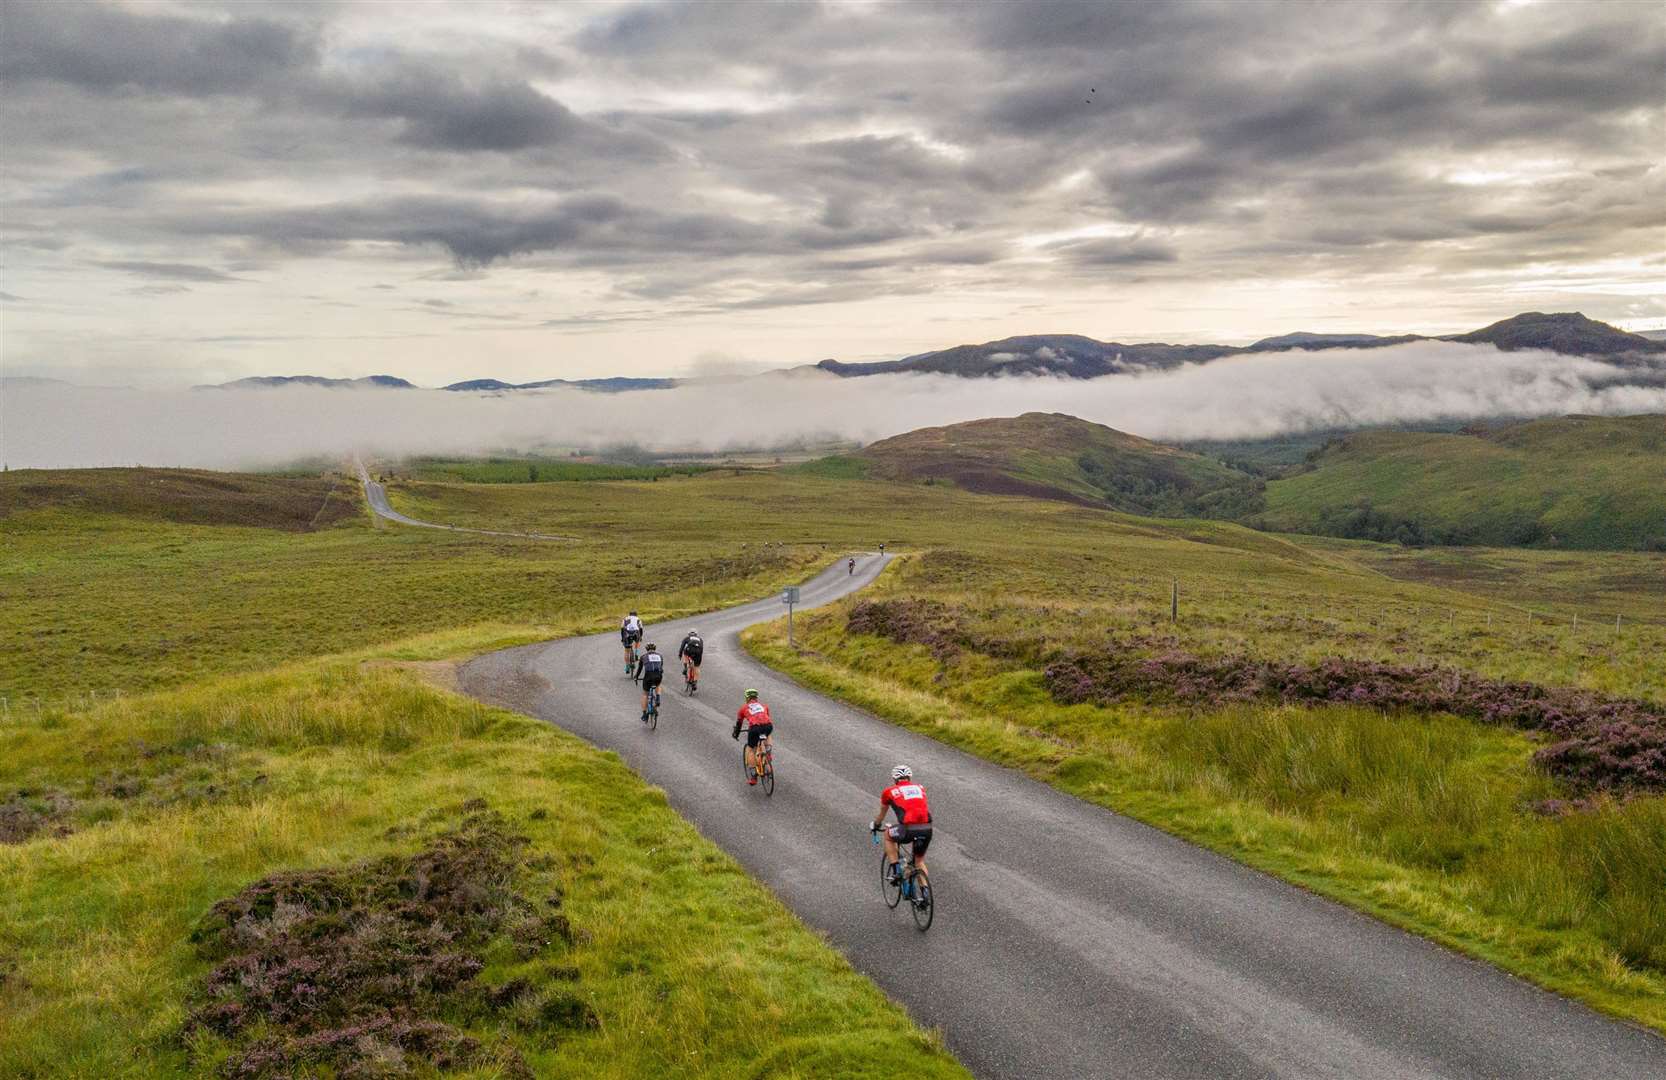 Riders make their way towards Whitebridge from the Suidhe viewpoint as mist hangs in the air. Picture: Airborne Lens